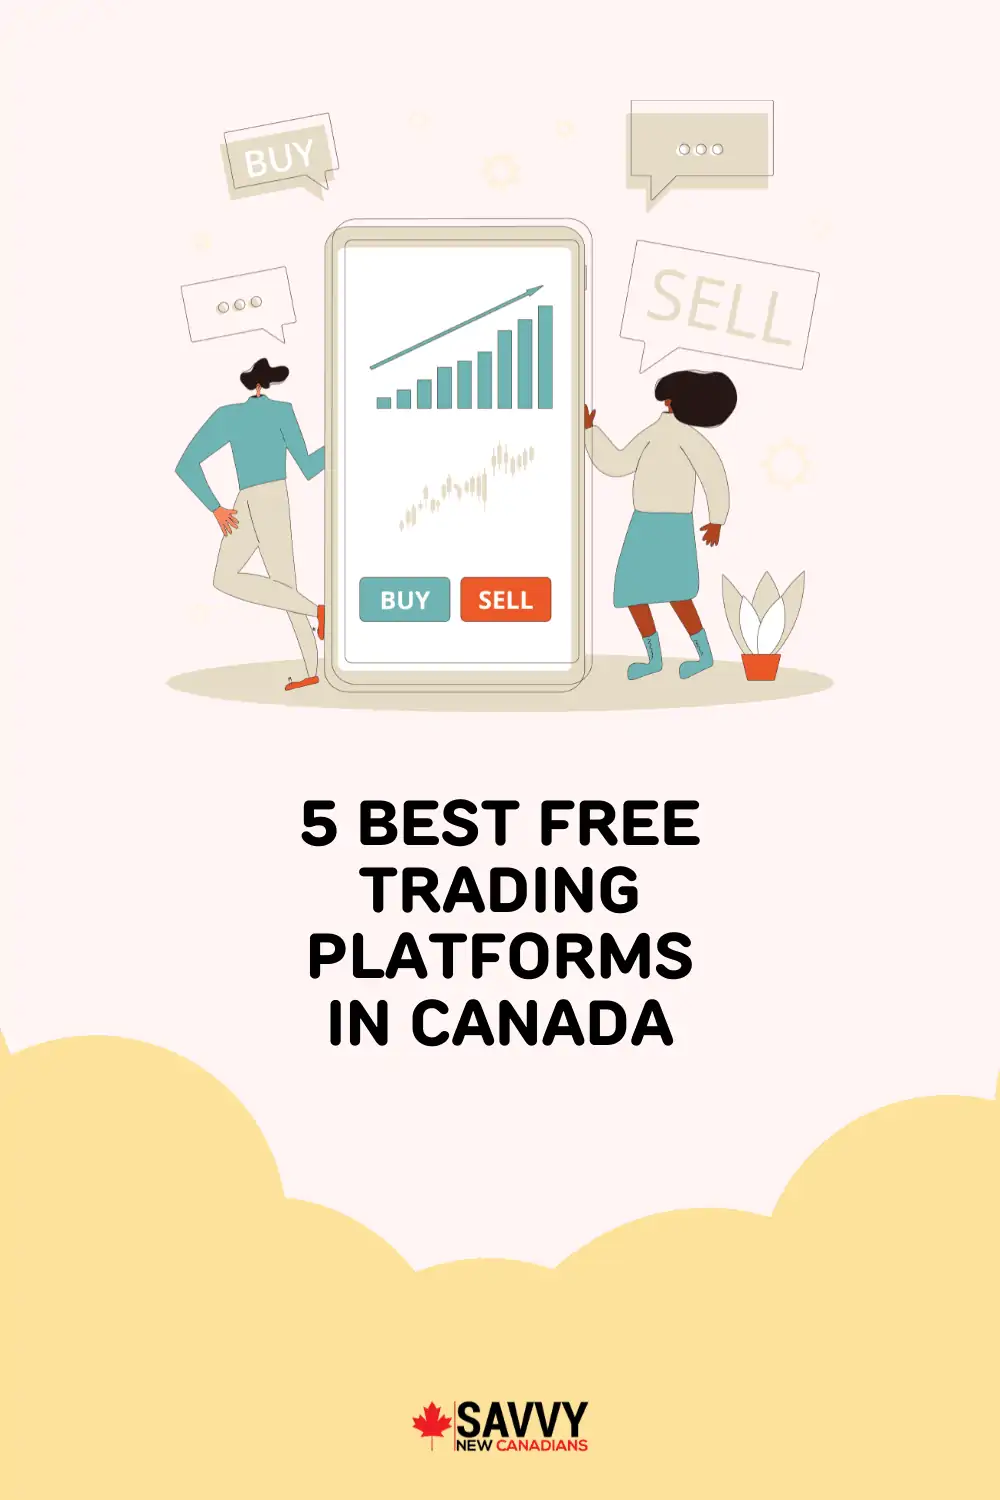 Free Stock Trading in Canada: 5 Best Free Trading Platforms 2022